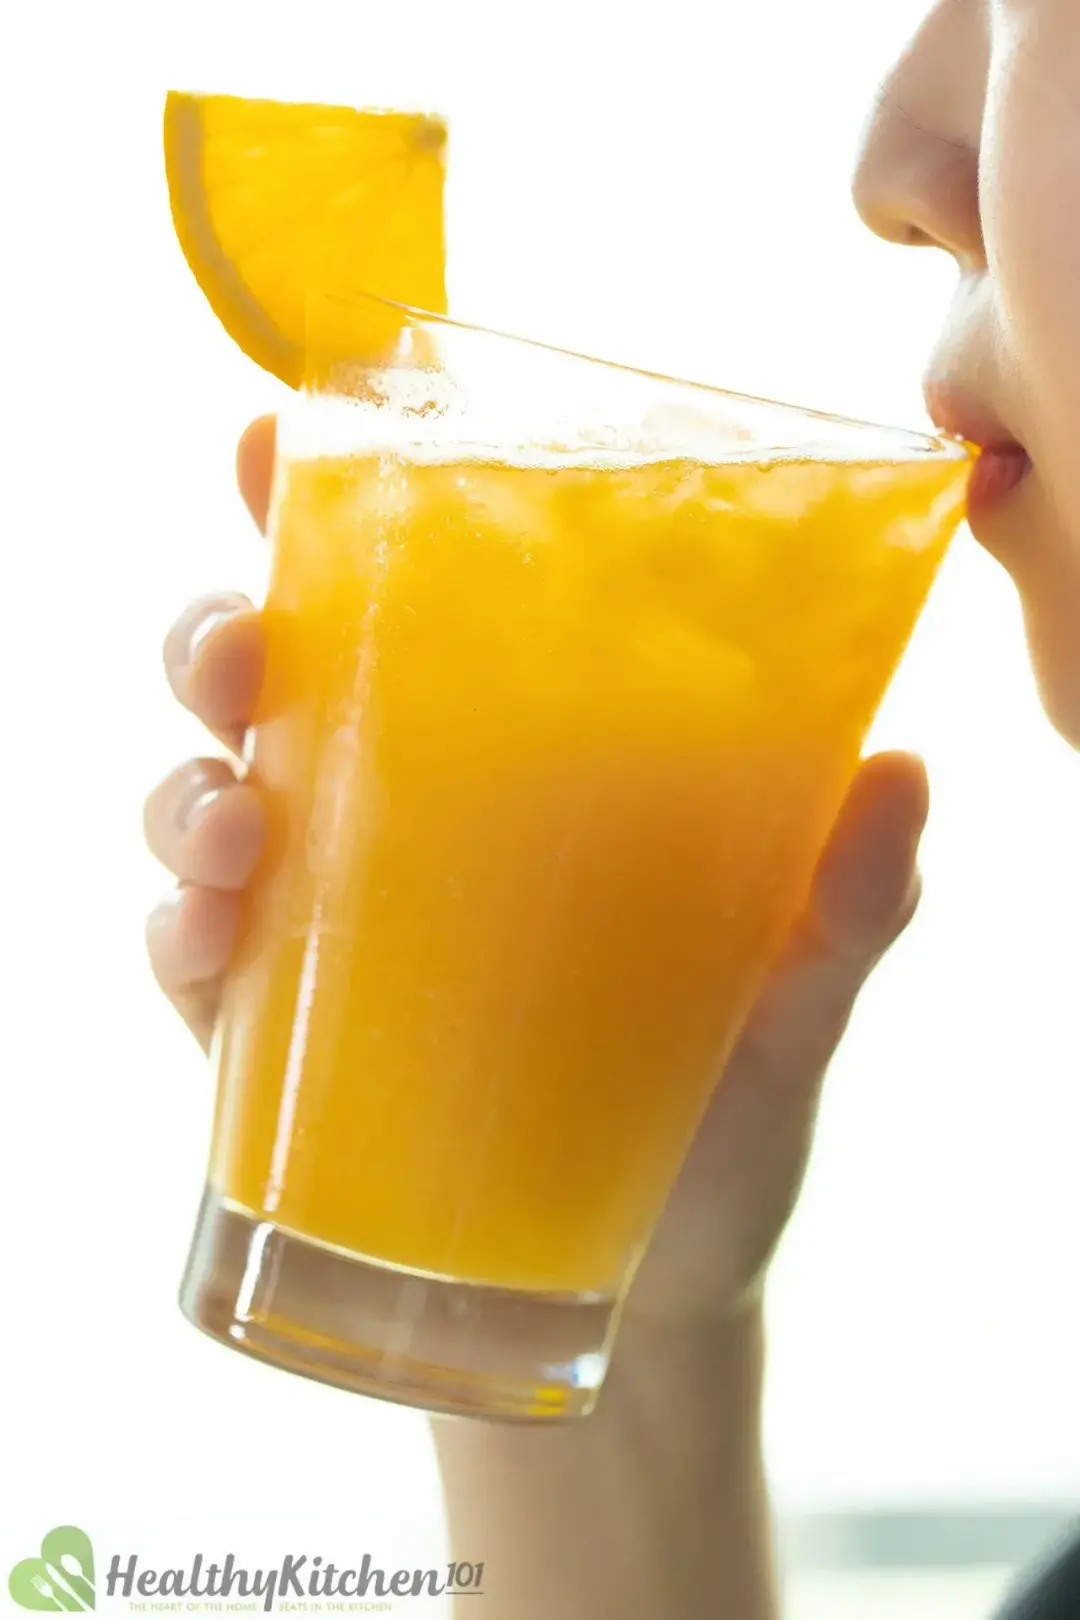 A person sipping a glass of ice orange juice